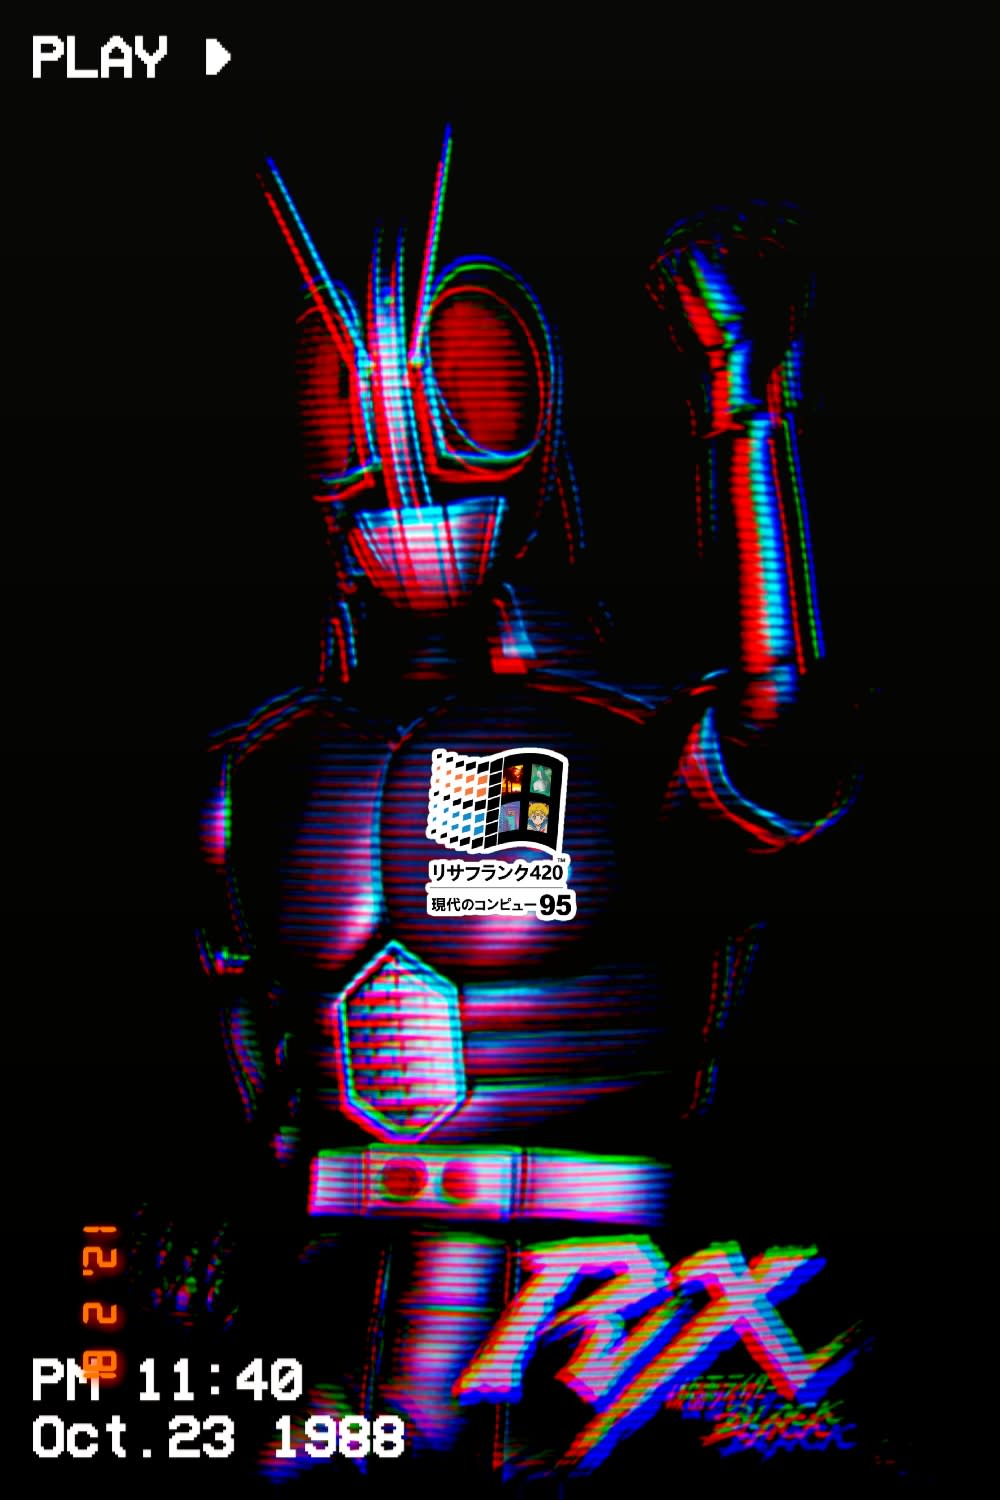 I tried to make Kamen Rider Vaporwave but it's really difficult to get an idea what to make. I'l try more and will post satisfying results which are hesvier edited.